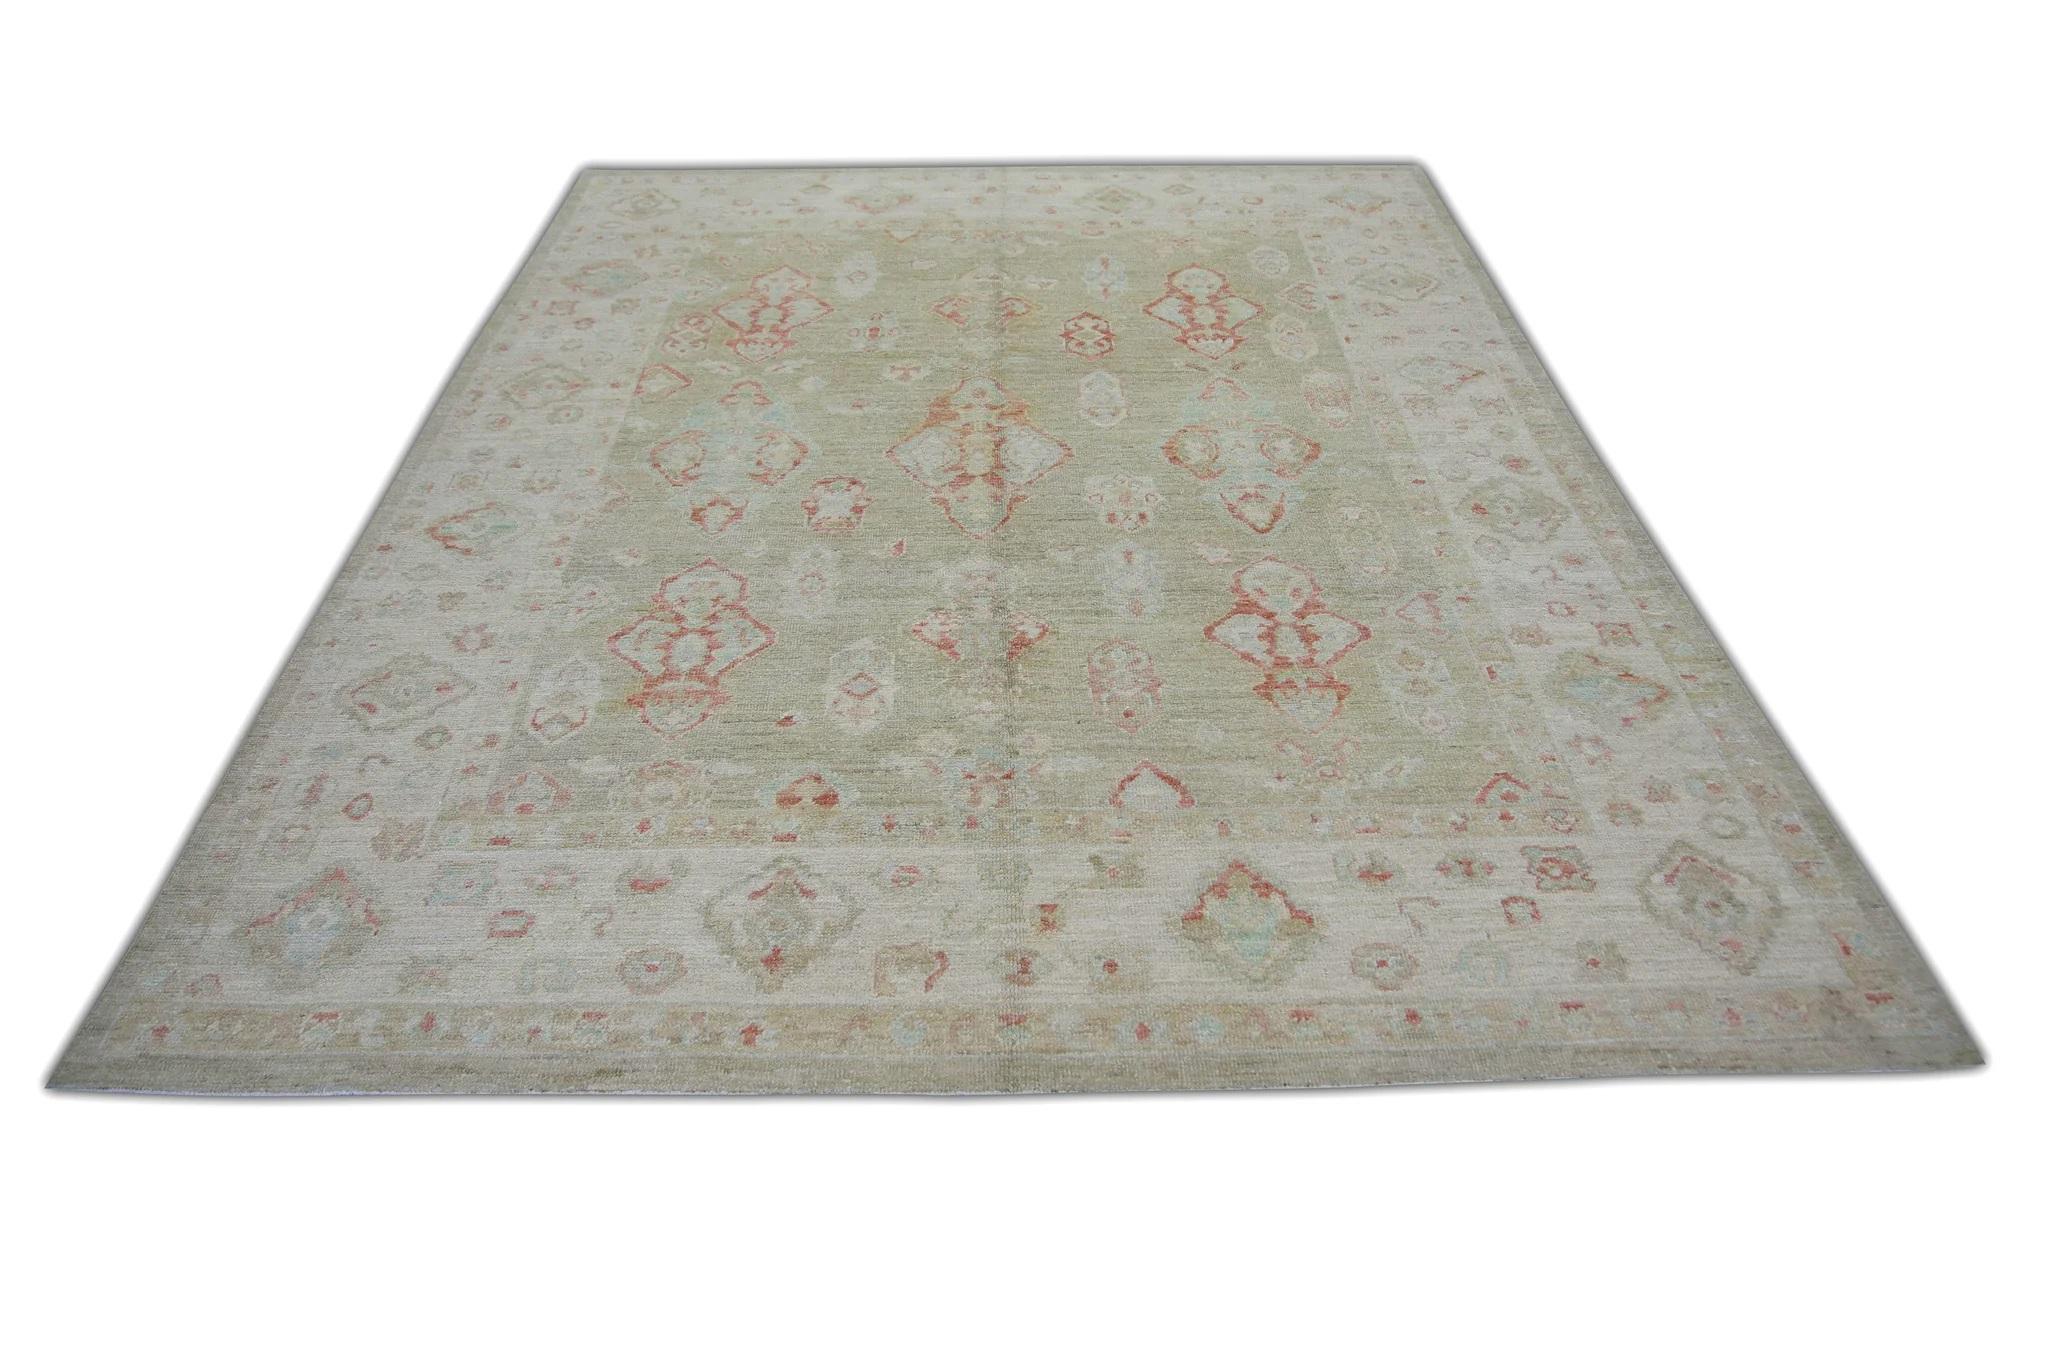 Contemporary Green and Red Floral Design Handwoven Wool Turkish Oushak Rug 8' x 9'11